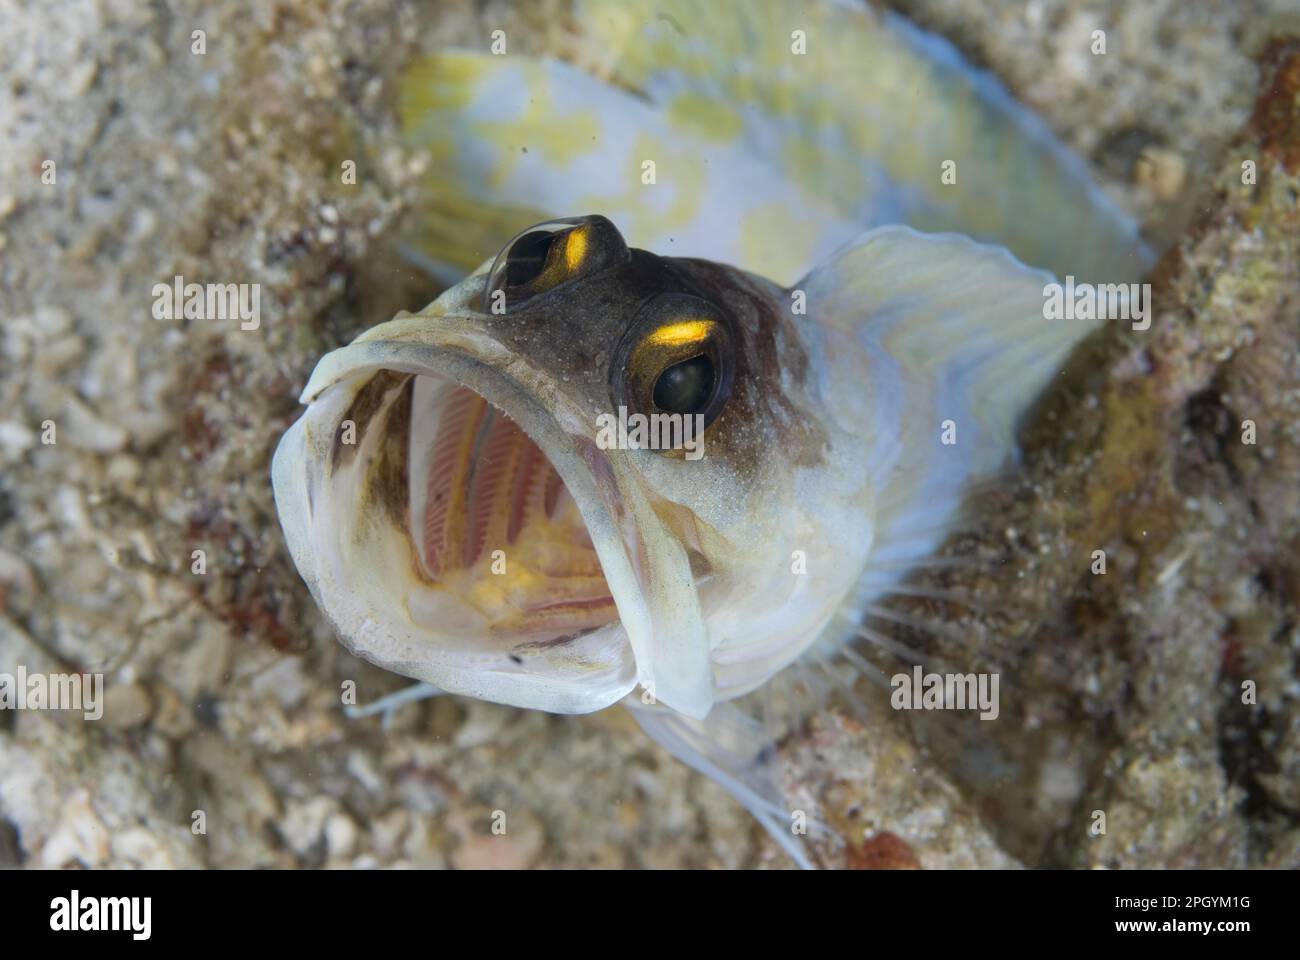 Adult Yellowbearded Johnfish (Opistognathus sp.), with open mouth, showing aggressive behaviour, Lembeh Island, Sulawesi, Indonesia Stock Photo